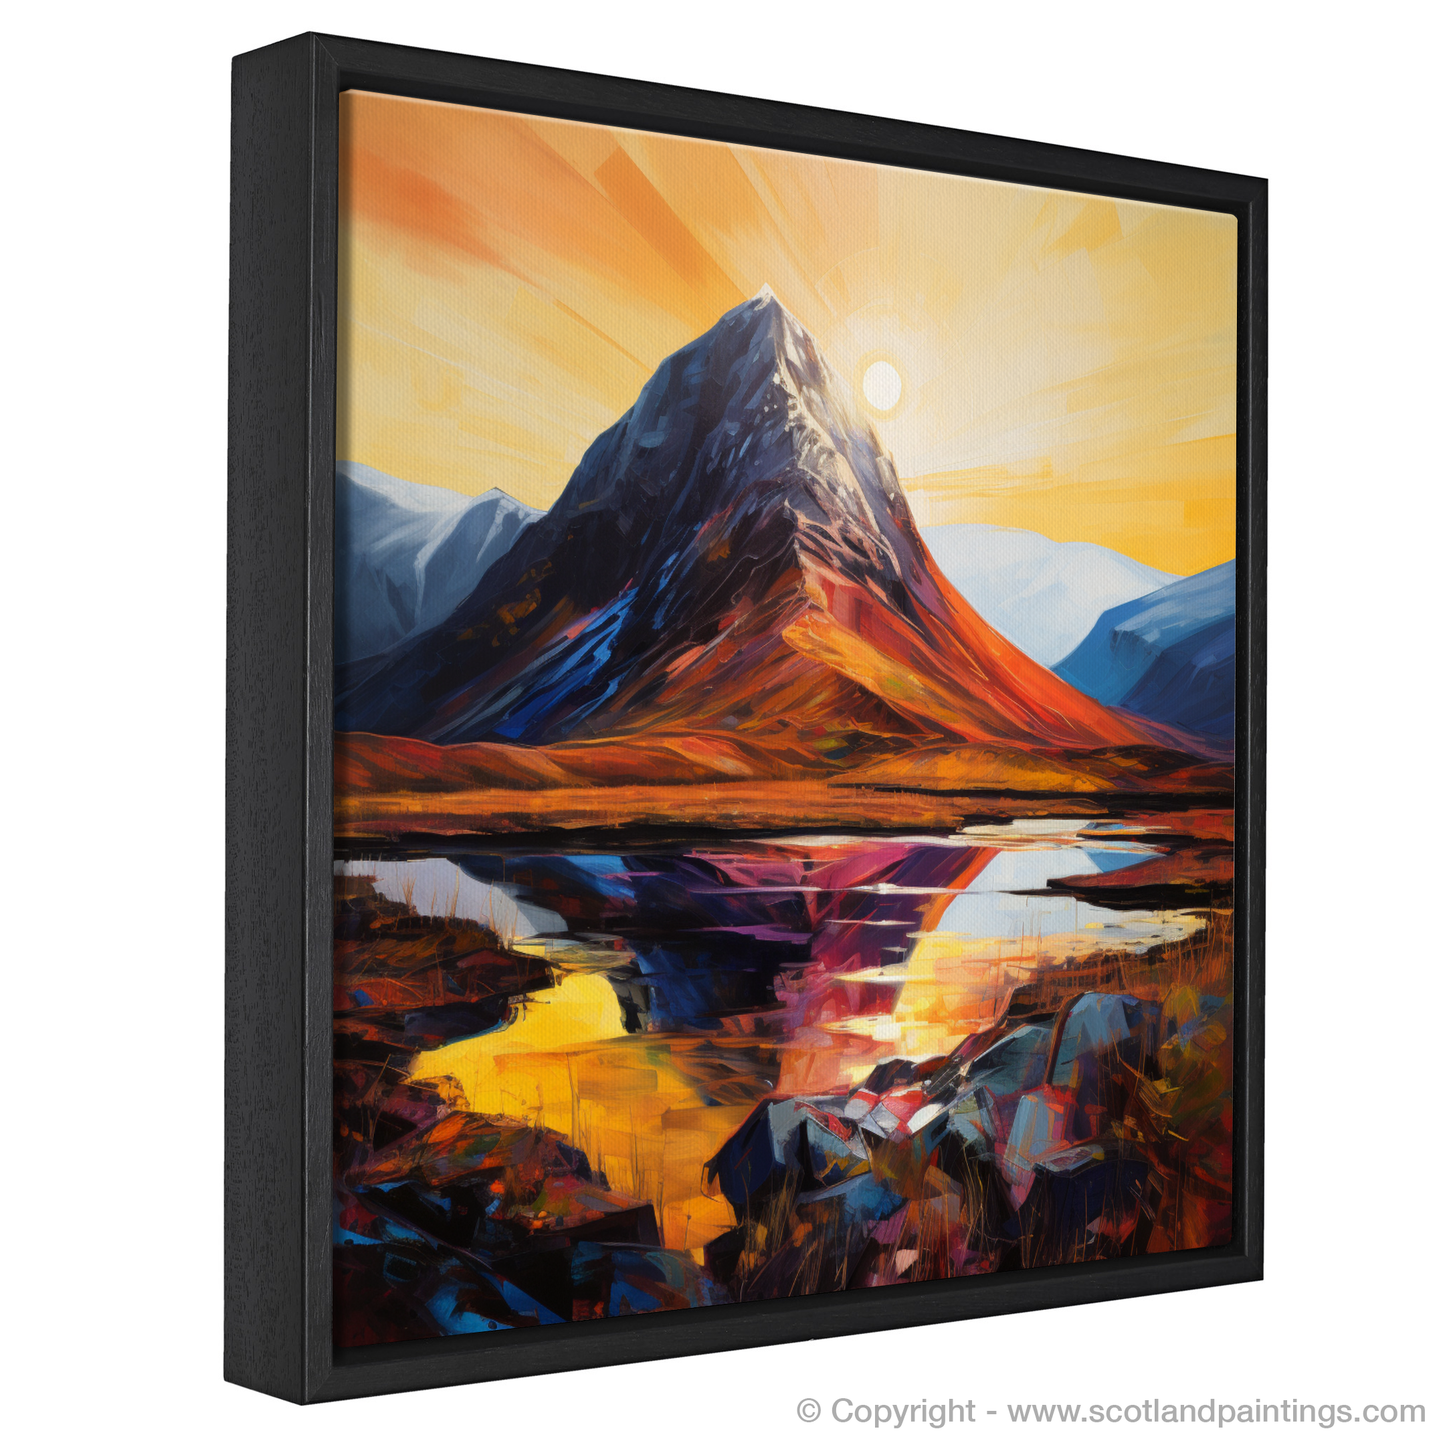 Painting and Art Print of Buachaille sunrise in Glencoe. Buachaille Sunrise: An Expressionist Ode to Glencoe's Majesty.